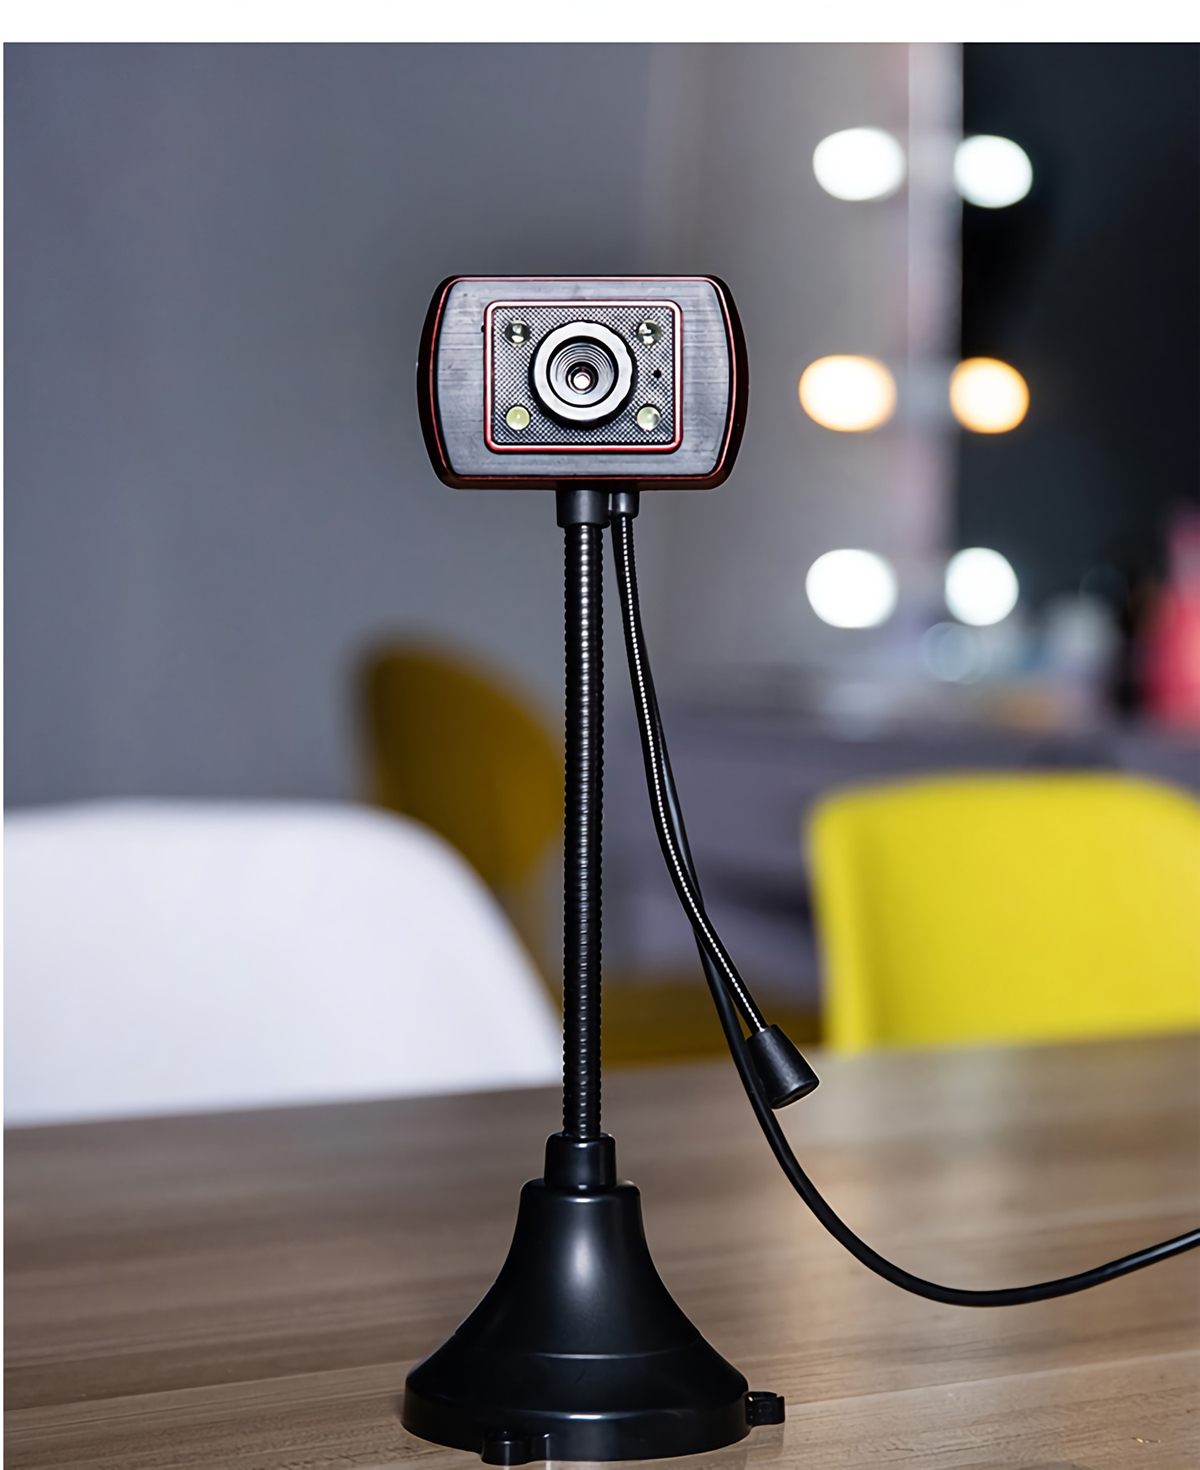 S620-480P-HD-Webcam-CMOS-USB-20-Wired-Computer-Web-Camera-Built-in-Microphone-Camera-for-Desktop-Com-1891978-10